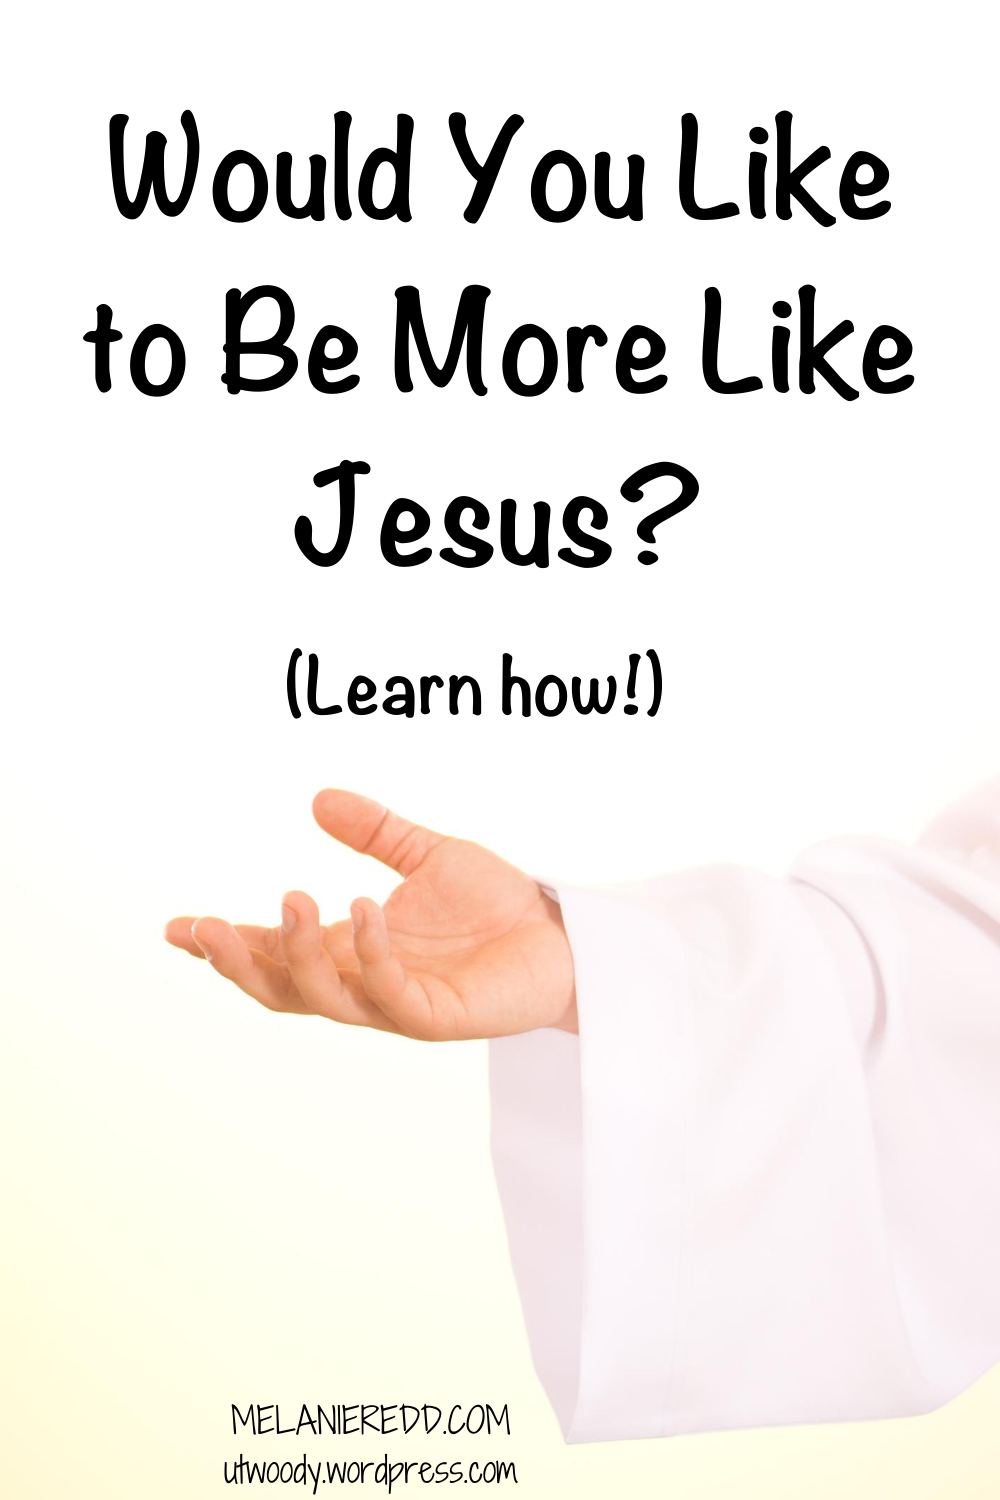 Who is your role model? Mentor? What if it was the Son of God? What if you were try to model His behavior? Would you like to be more like Jesus? Learn how in this new post. #morelikeJesus #Jesus #followGod #belikeJes